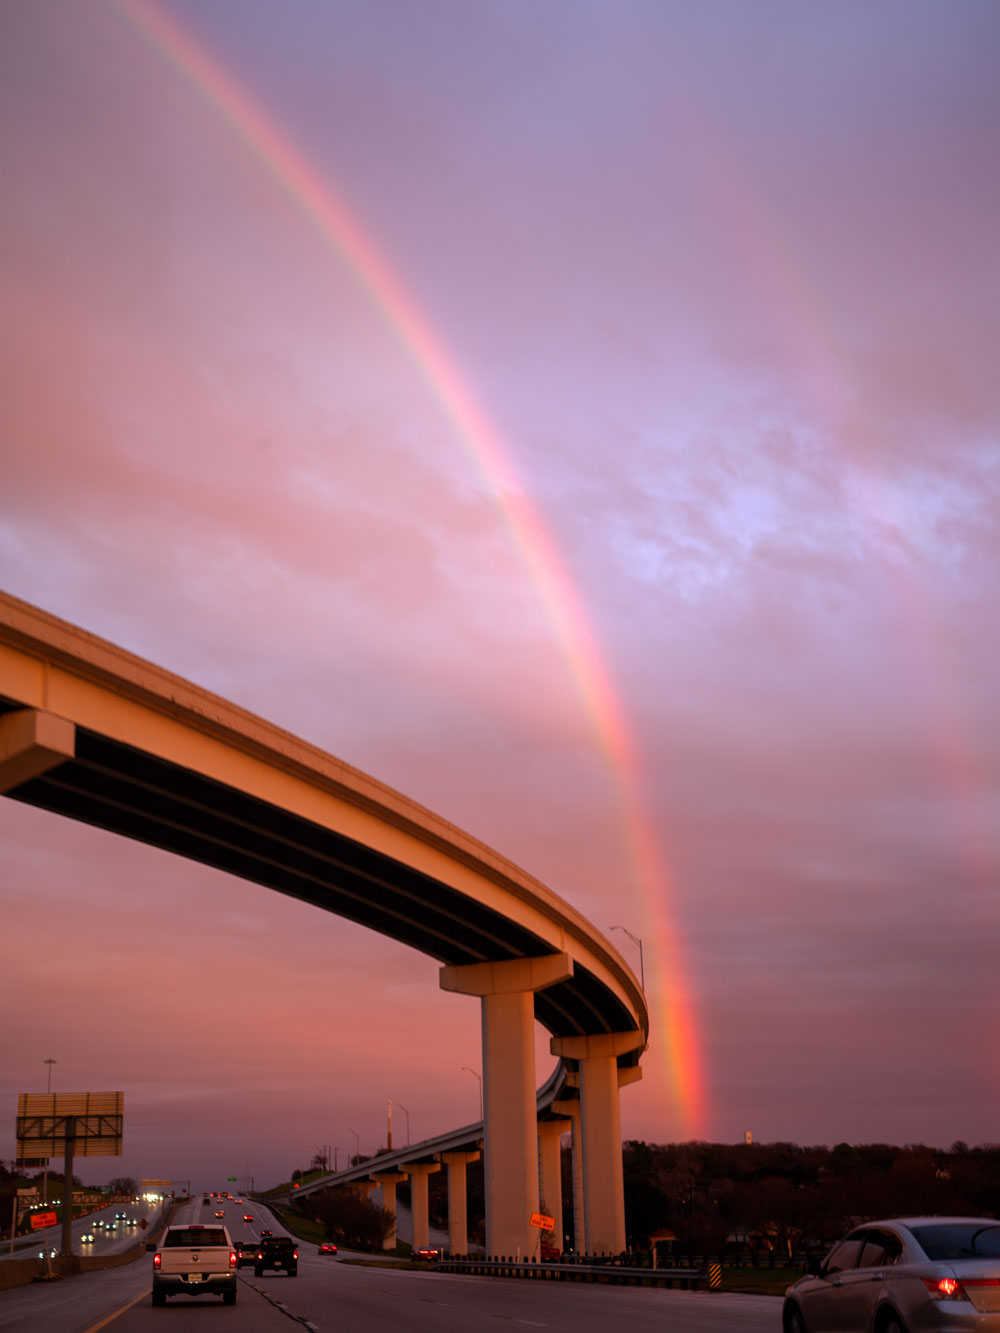 A purple and pink sunset in the background of an elevated roadway with a rainbow extending almost vertically to the top of the image